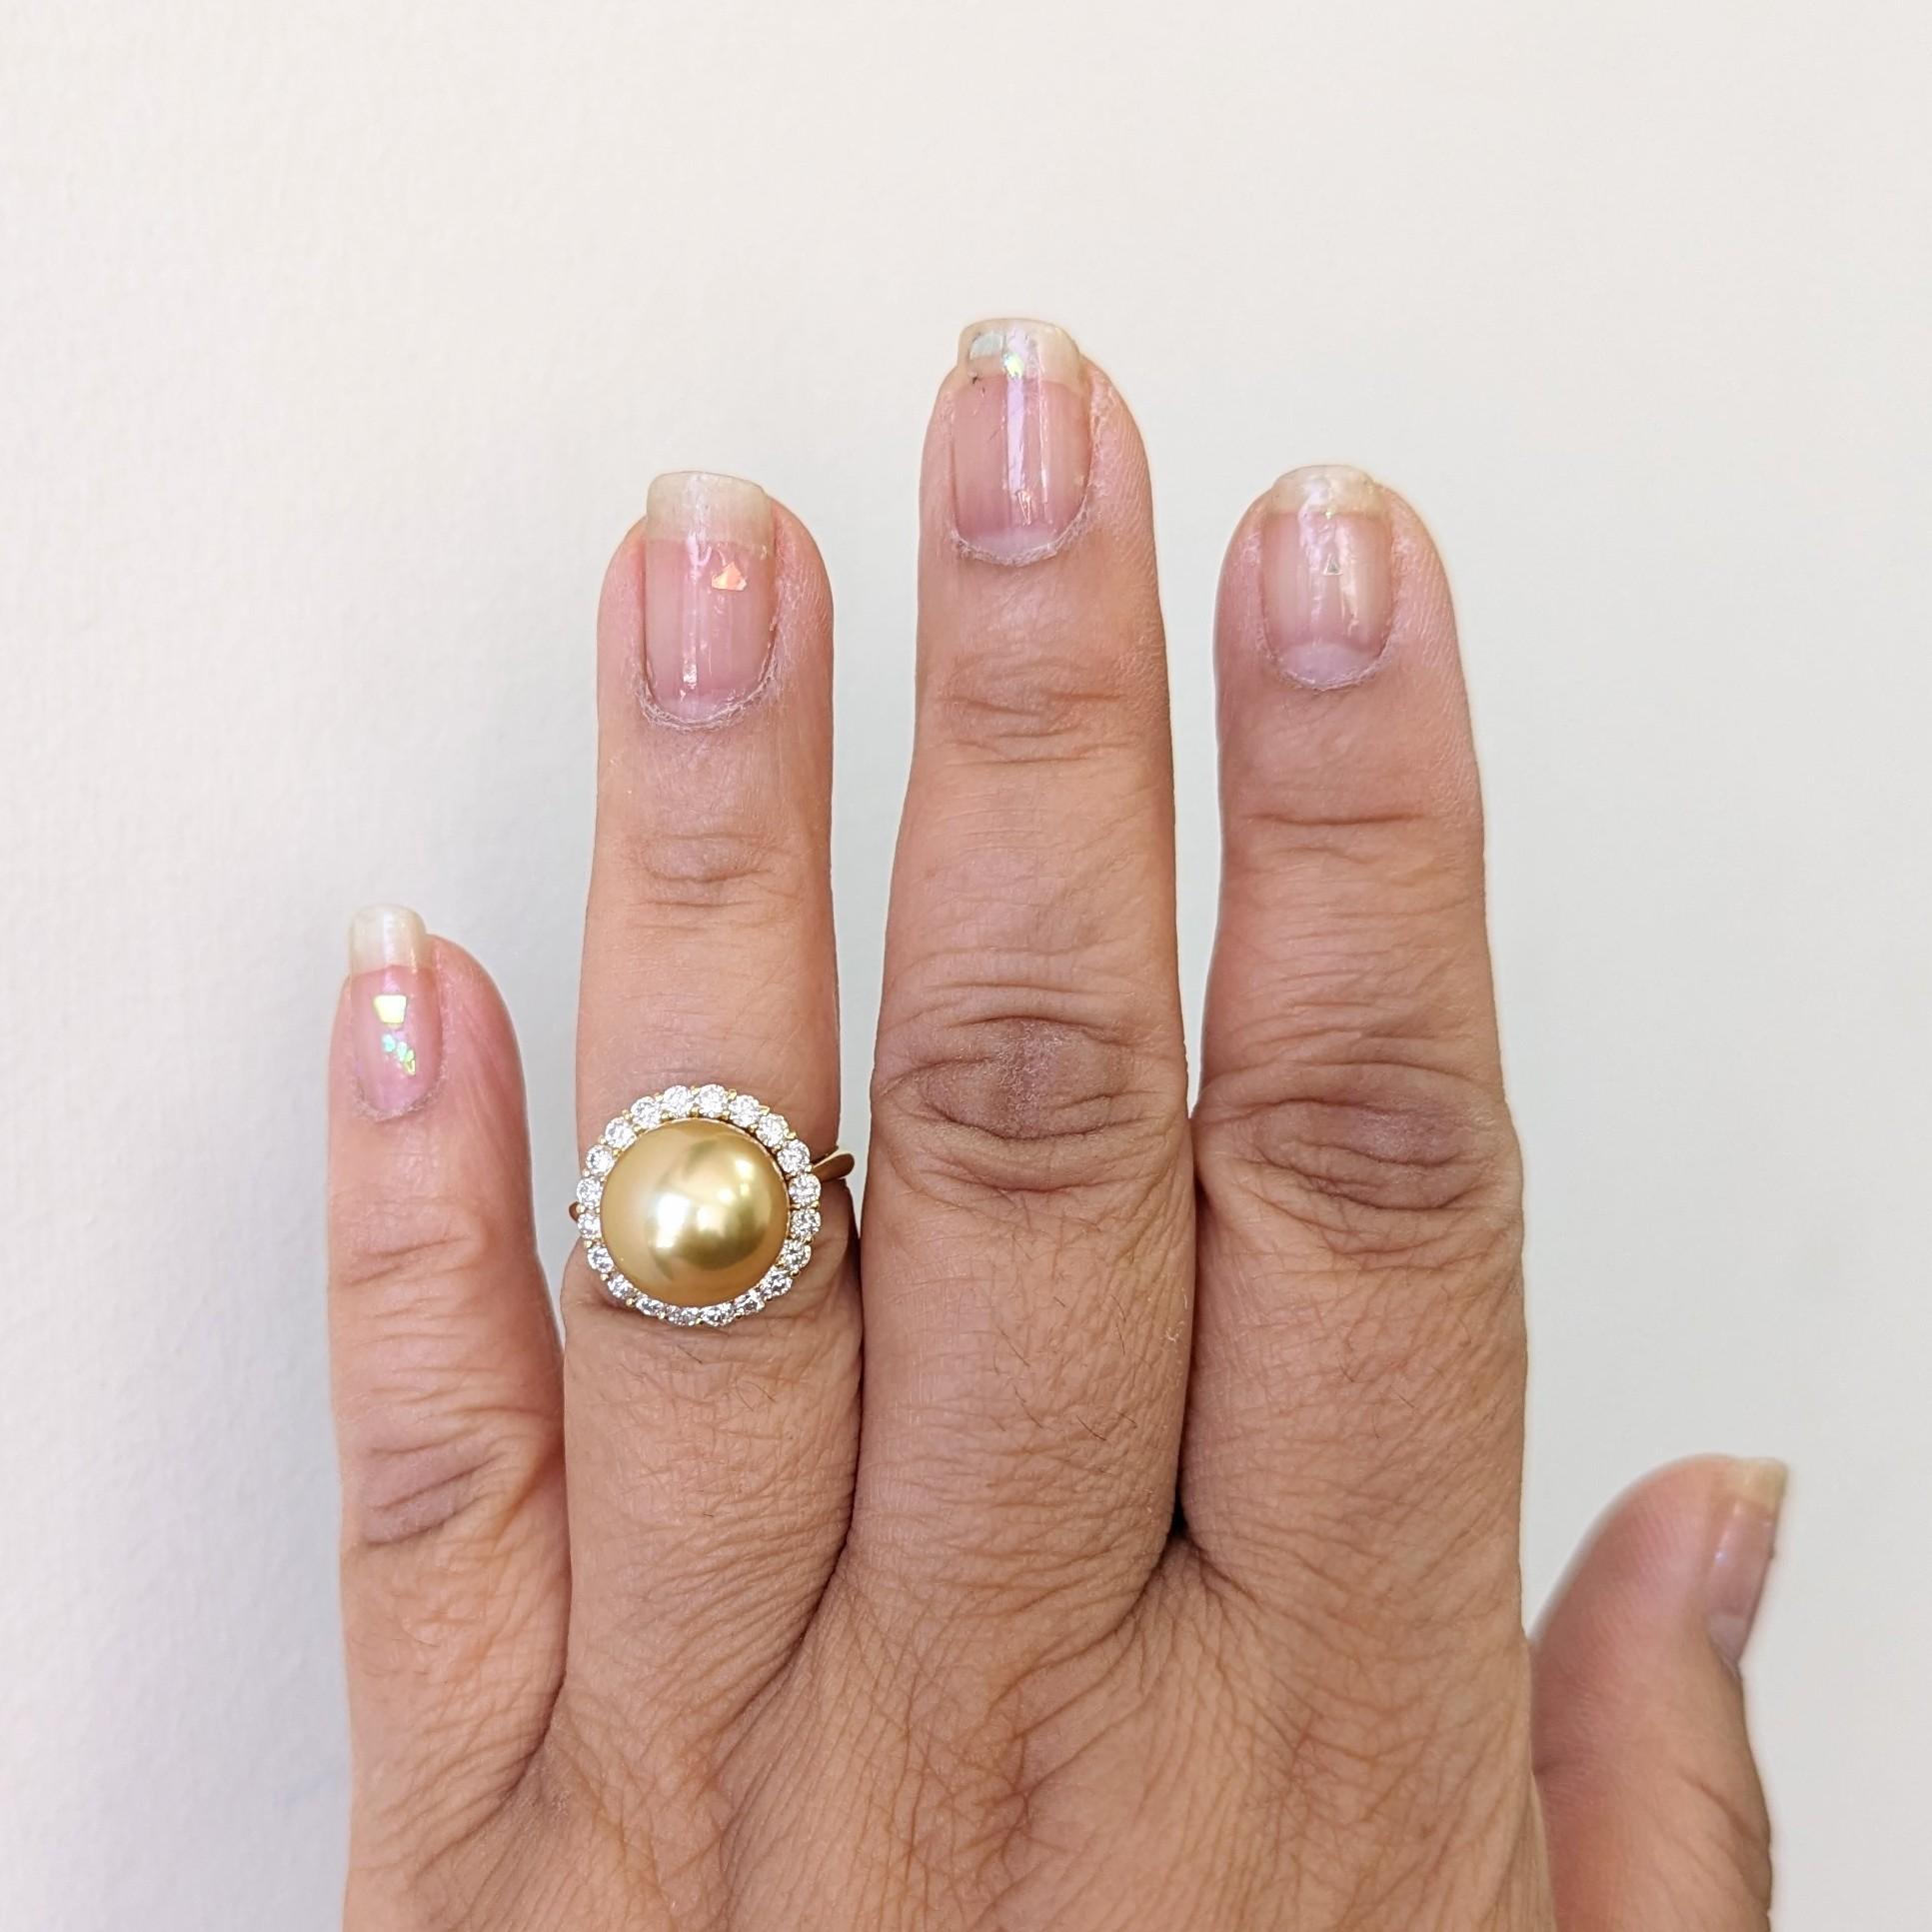 Beautiful big round golden pearl with 0.70 ct. good quality white diamond rounds.  Handmade in 18k yellow gold.  Ring size 6.25.